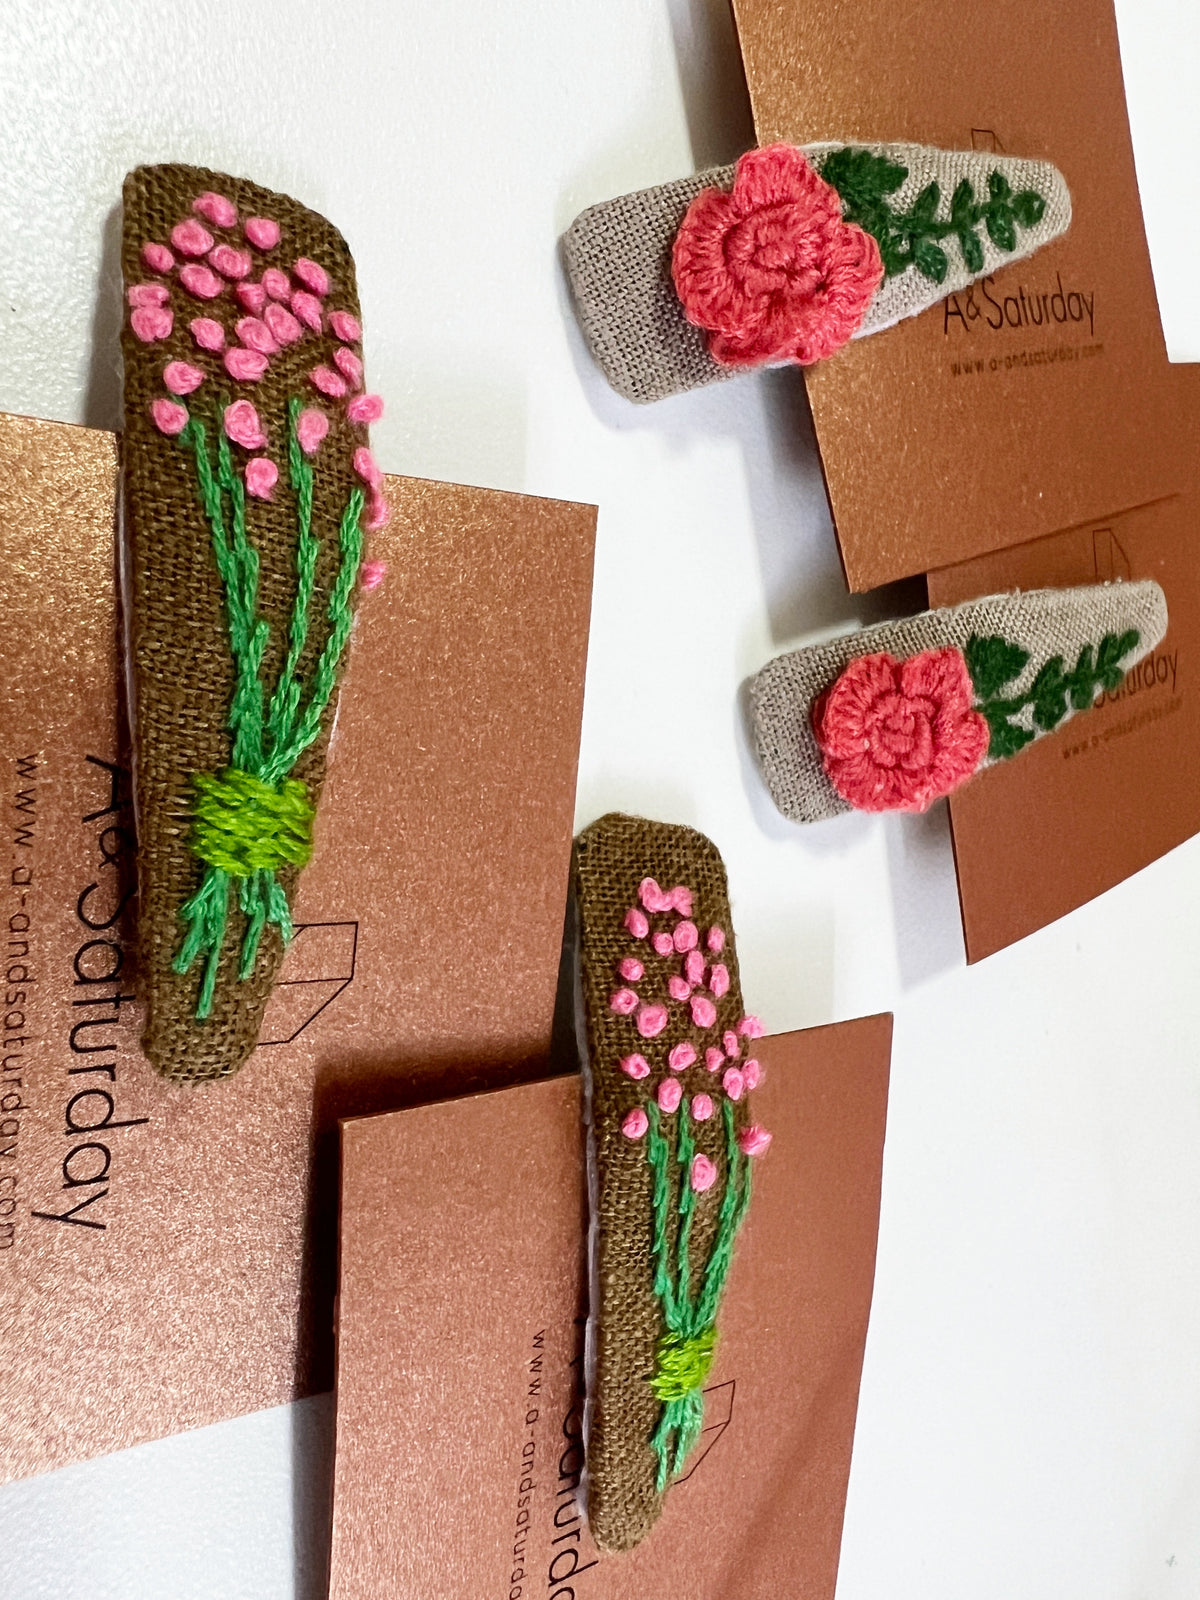 Lila embroidered hair clip